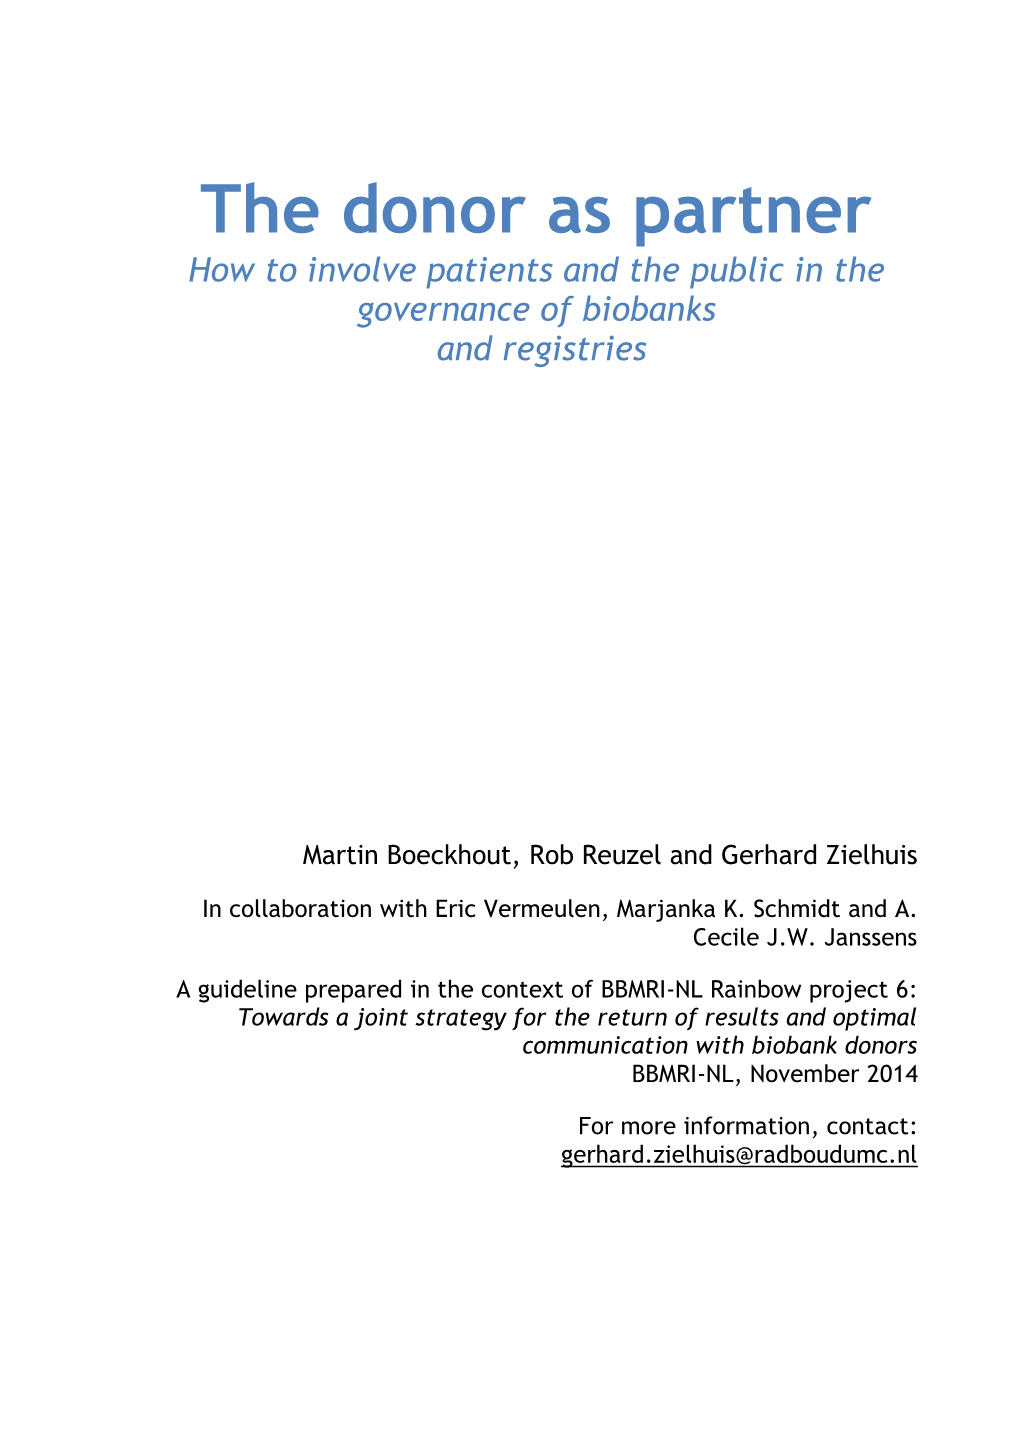 The Donor As Partner How to Involve Patients and the Public in the Governance of Biobanks and Registries